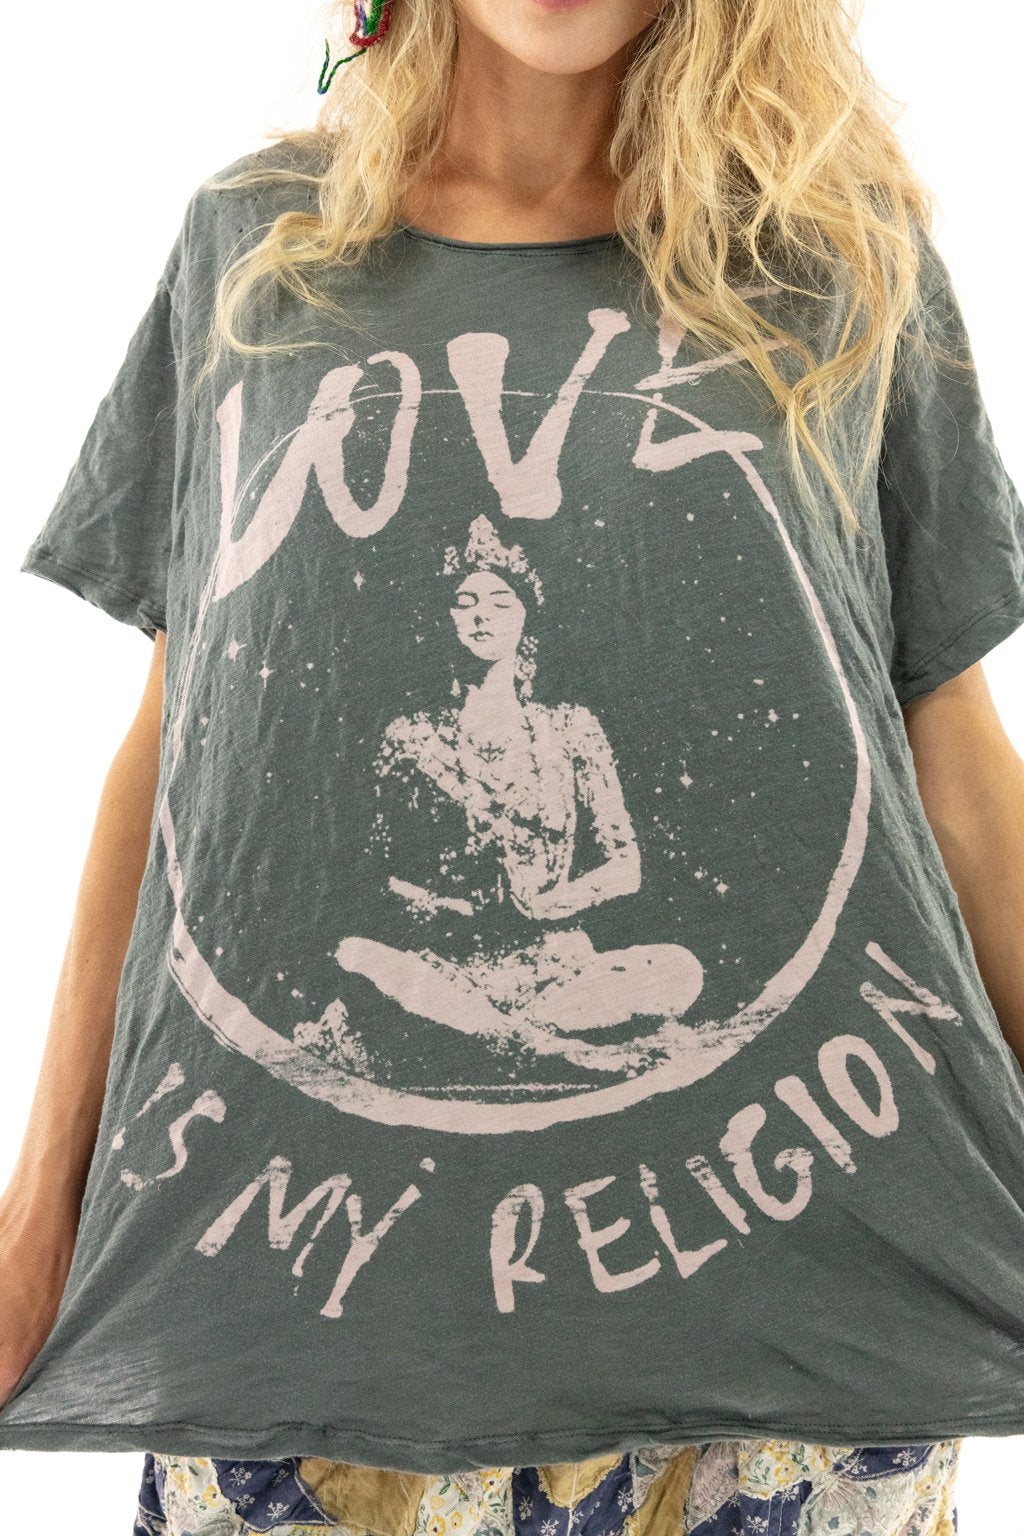 LOVE RELIGION TEE - Kingfisher Road - Online Boutique